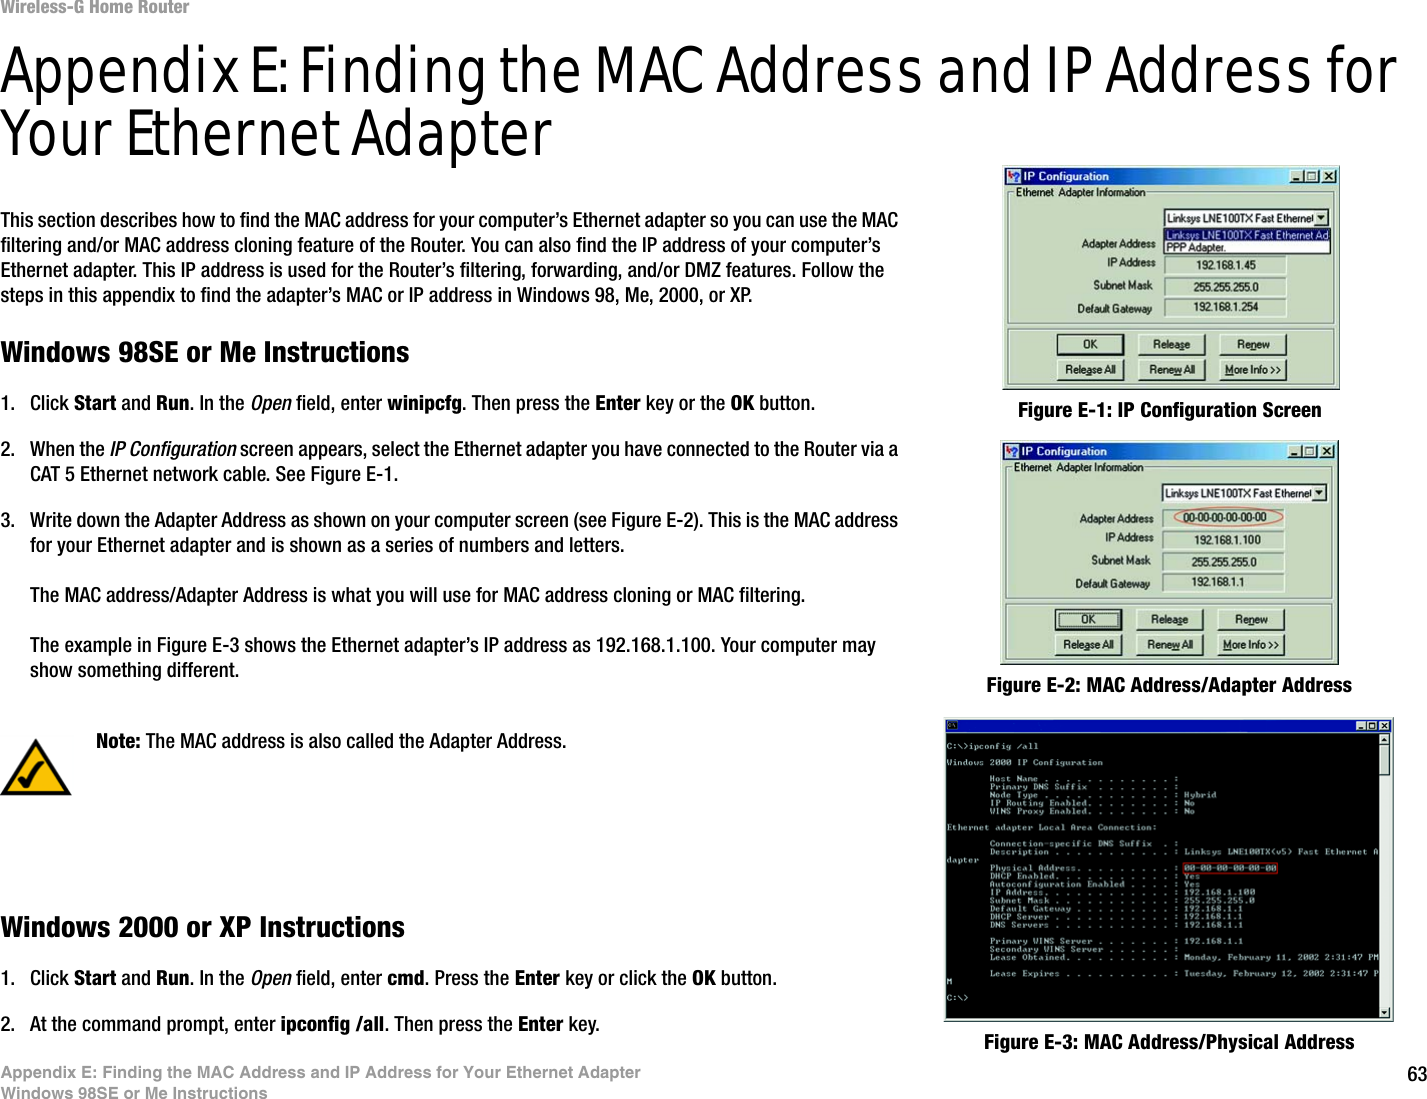 63Appendix E: Finding the MAC Address and IP Address for Your Ethernet AdapterWindows 98SE or Me InstructionsWireless-G Home RouterAppendix E: Finding the MAC Address and IP Address for Your Ethernet AdapterThis section describes how to find the MAC address for your computer’s Ethernet adapter so you can use the MAC filtering and/or MAC address cloning feature of the Router. You can also find the IP address of your computer’s Ethernet adapter. This IP address is used for the Router’s filtering, forwarding, and/or DMZ features. Follow the steps in this appendix to find the adapter’s MAC or IP address in Windows 98, Me, 2000, or XP.Windows 98SE or Me Instructions1. Click Start and Run. In the Open field, enter winipcfg. Then press the Enter key or the OK button. 2. When the IP Configuration screen appears, select the Ethernet adapter you have connected to the Router via a CAT 5 Ethernet network cable. See Figure E-1.3. Write down the Adapter Address as shown on your computer screen (see Figure E-2). This is the MAC address for your Ethernet adapter and is shown as a series of numbers and letters.The MAC address/Adapter Address is what you will use for MAC address cloning or MAC filtering.The example in Figure E-3 shows the Ethernet adapter’s IP address as 192.168.1.100. Your computer may show something different.Windows 2000 or XP Instructions1. Click Start and Run. In the Open field, enter cmd. Press the Enter key or click the OK button.2. At the command prompt, enter ipconfig /all. Then press the Enter key.Figure E-2: MAC Address/Adapter AddressFigure E-1: IP Configuration ScreenNote: The MAC address is also called the Adapter Address.Figure E-3: MAC Address/Physical Address